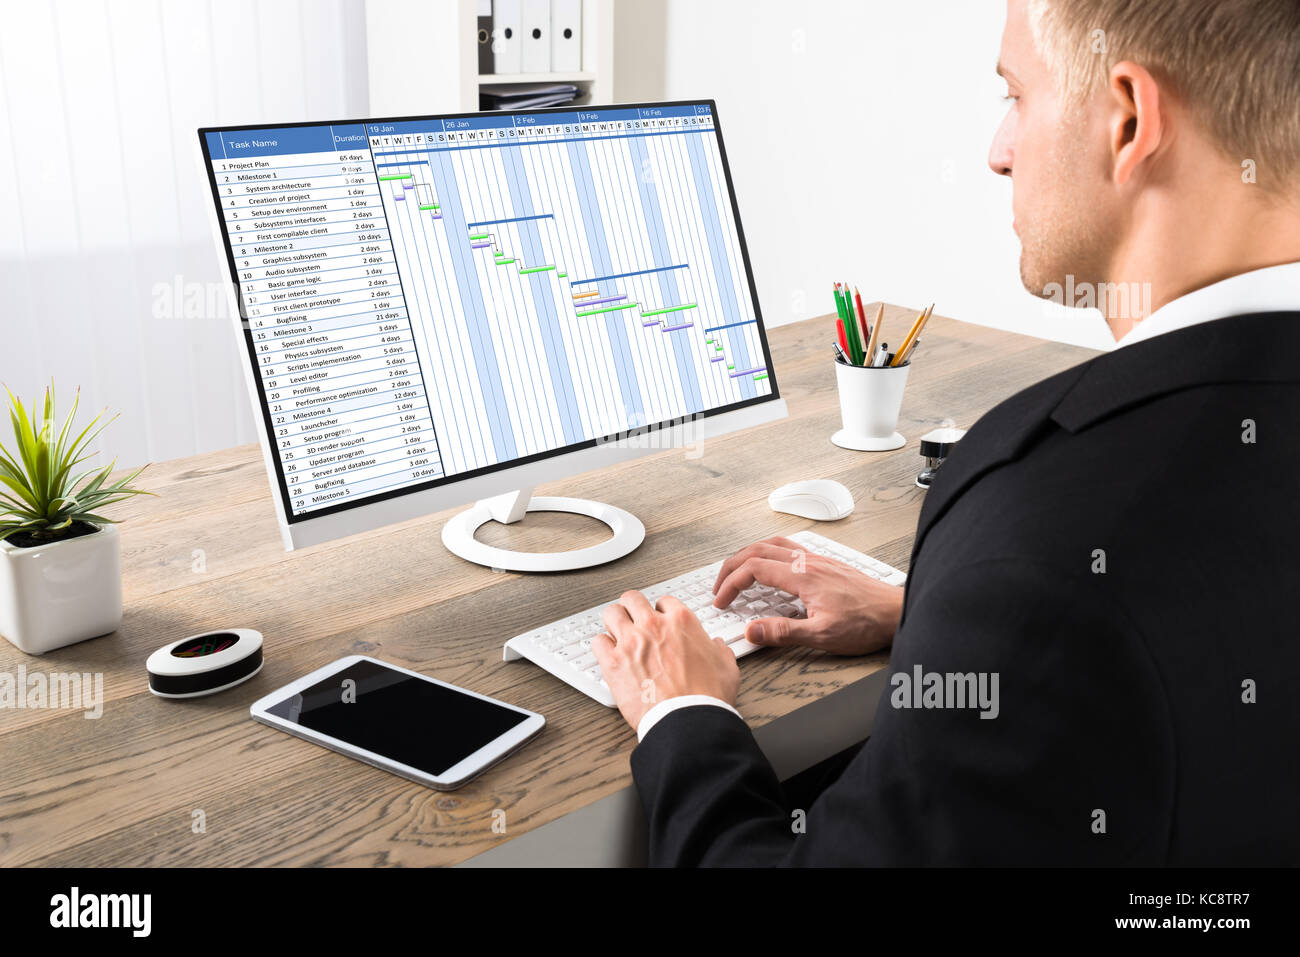 Young Businessman Working On Gantt Chart On Computer At Office Stock Photo